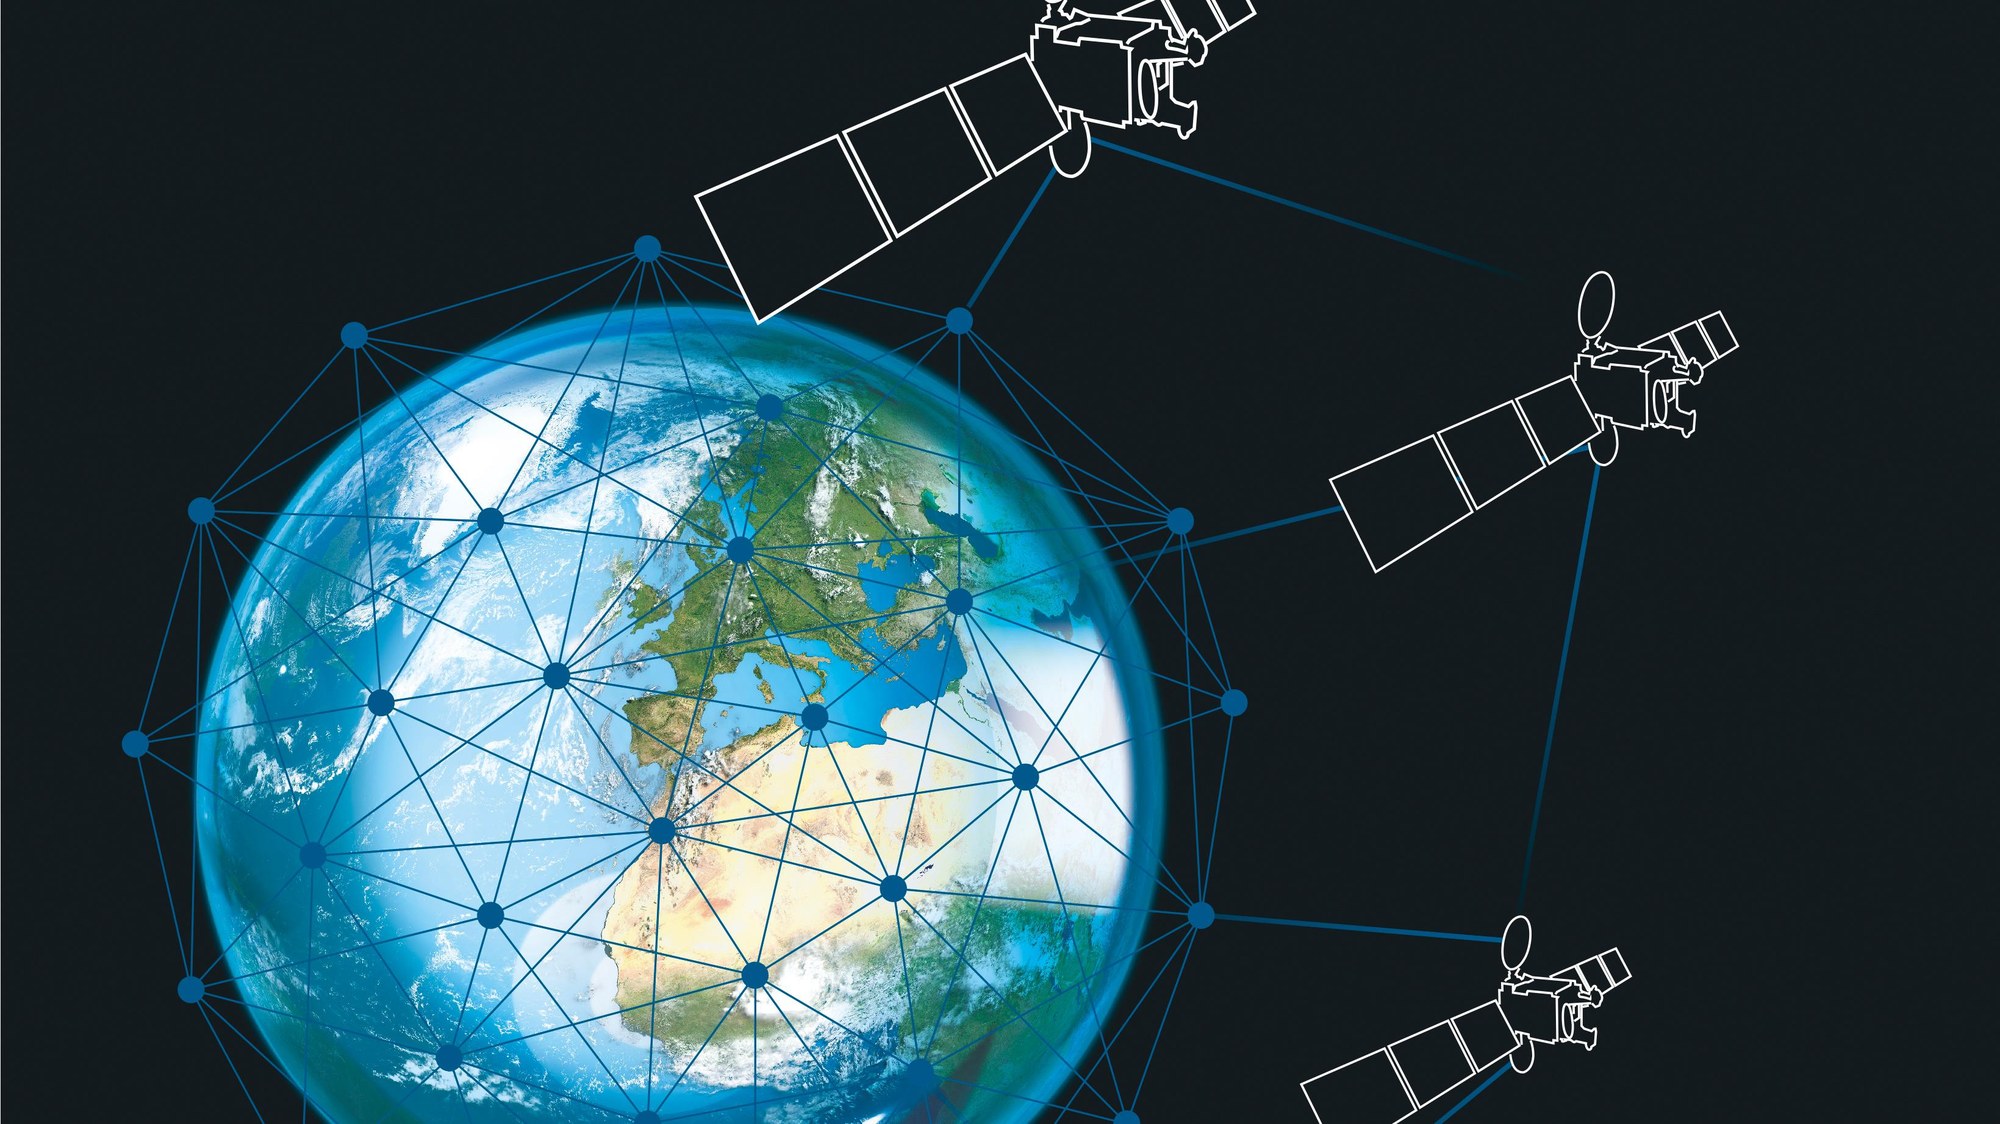 Globally networked Earth